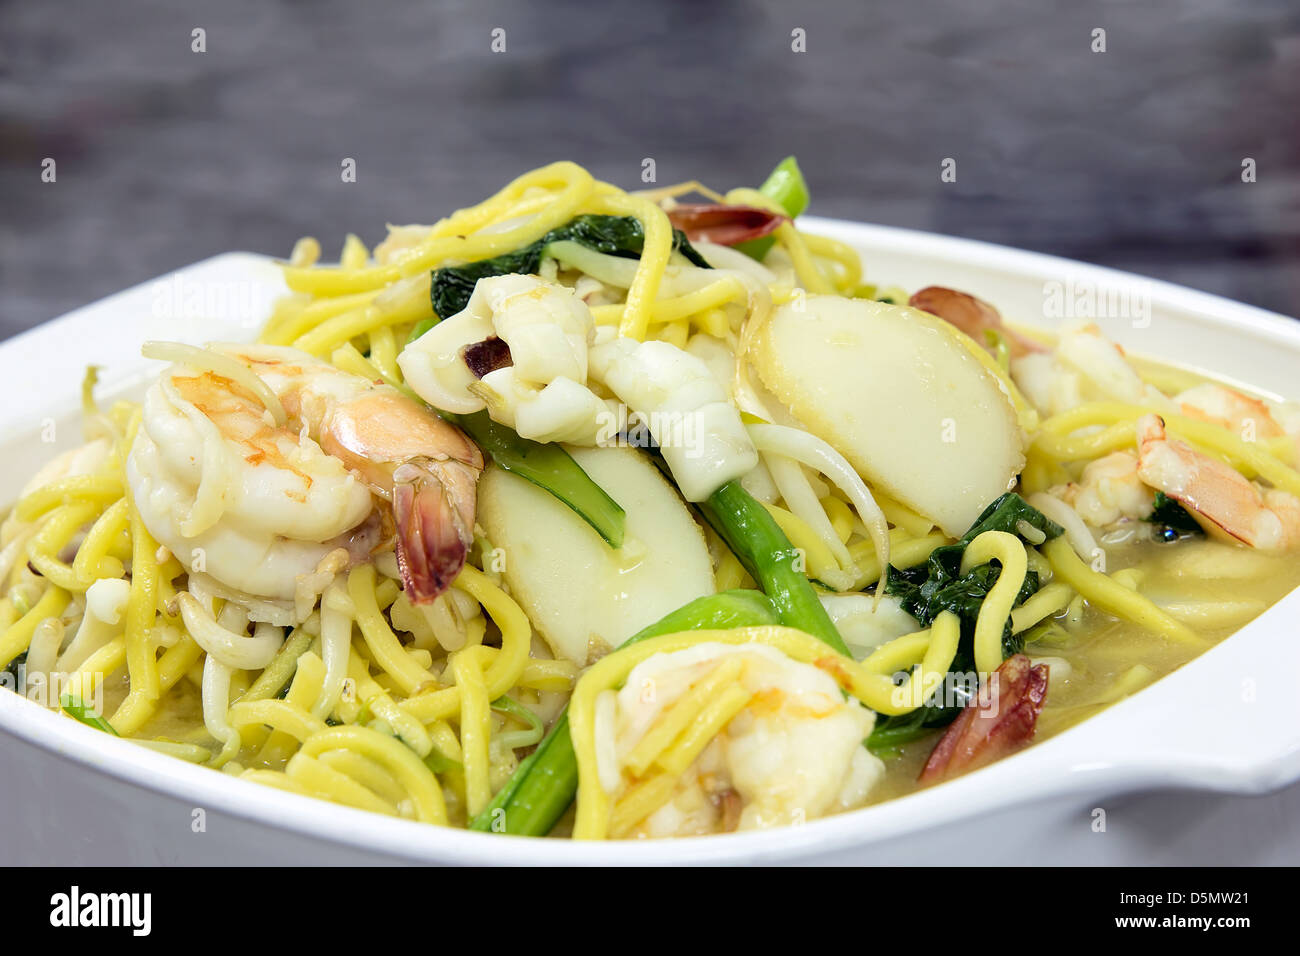 Hokkien Mee Stir Fry Yellow Noodles with Prawns Squids Fishcake and Green Vegetables Side View Closeup Stock Photo